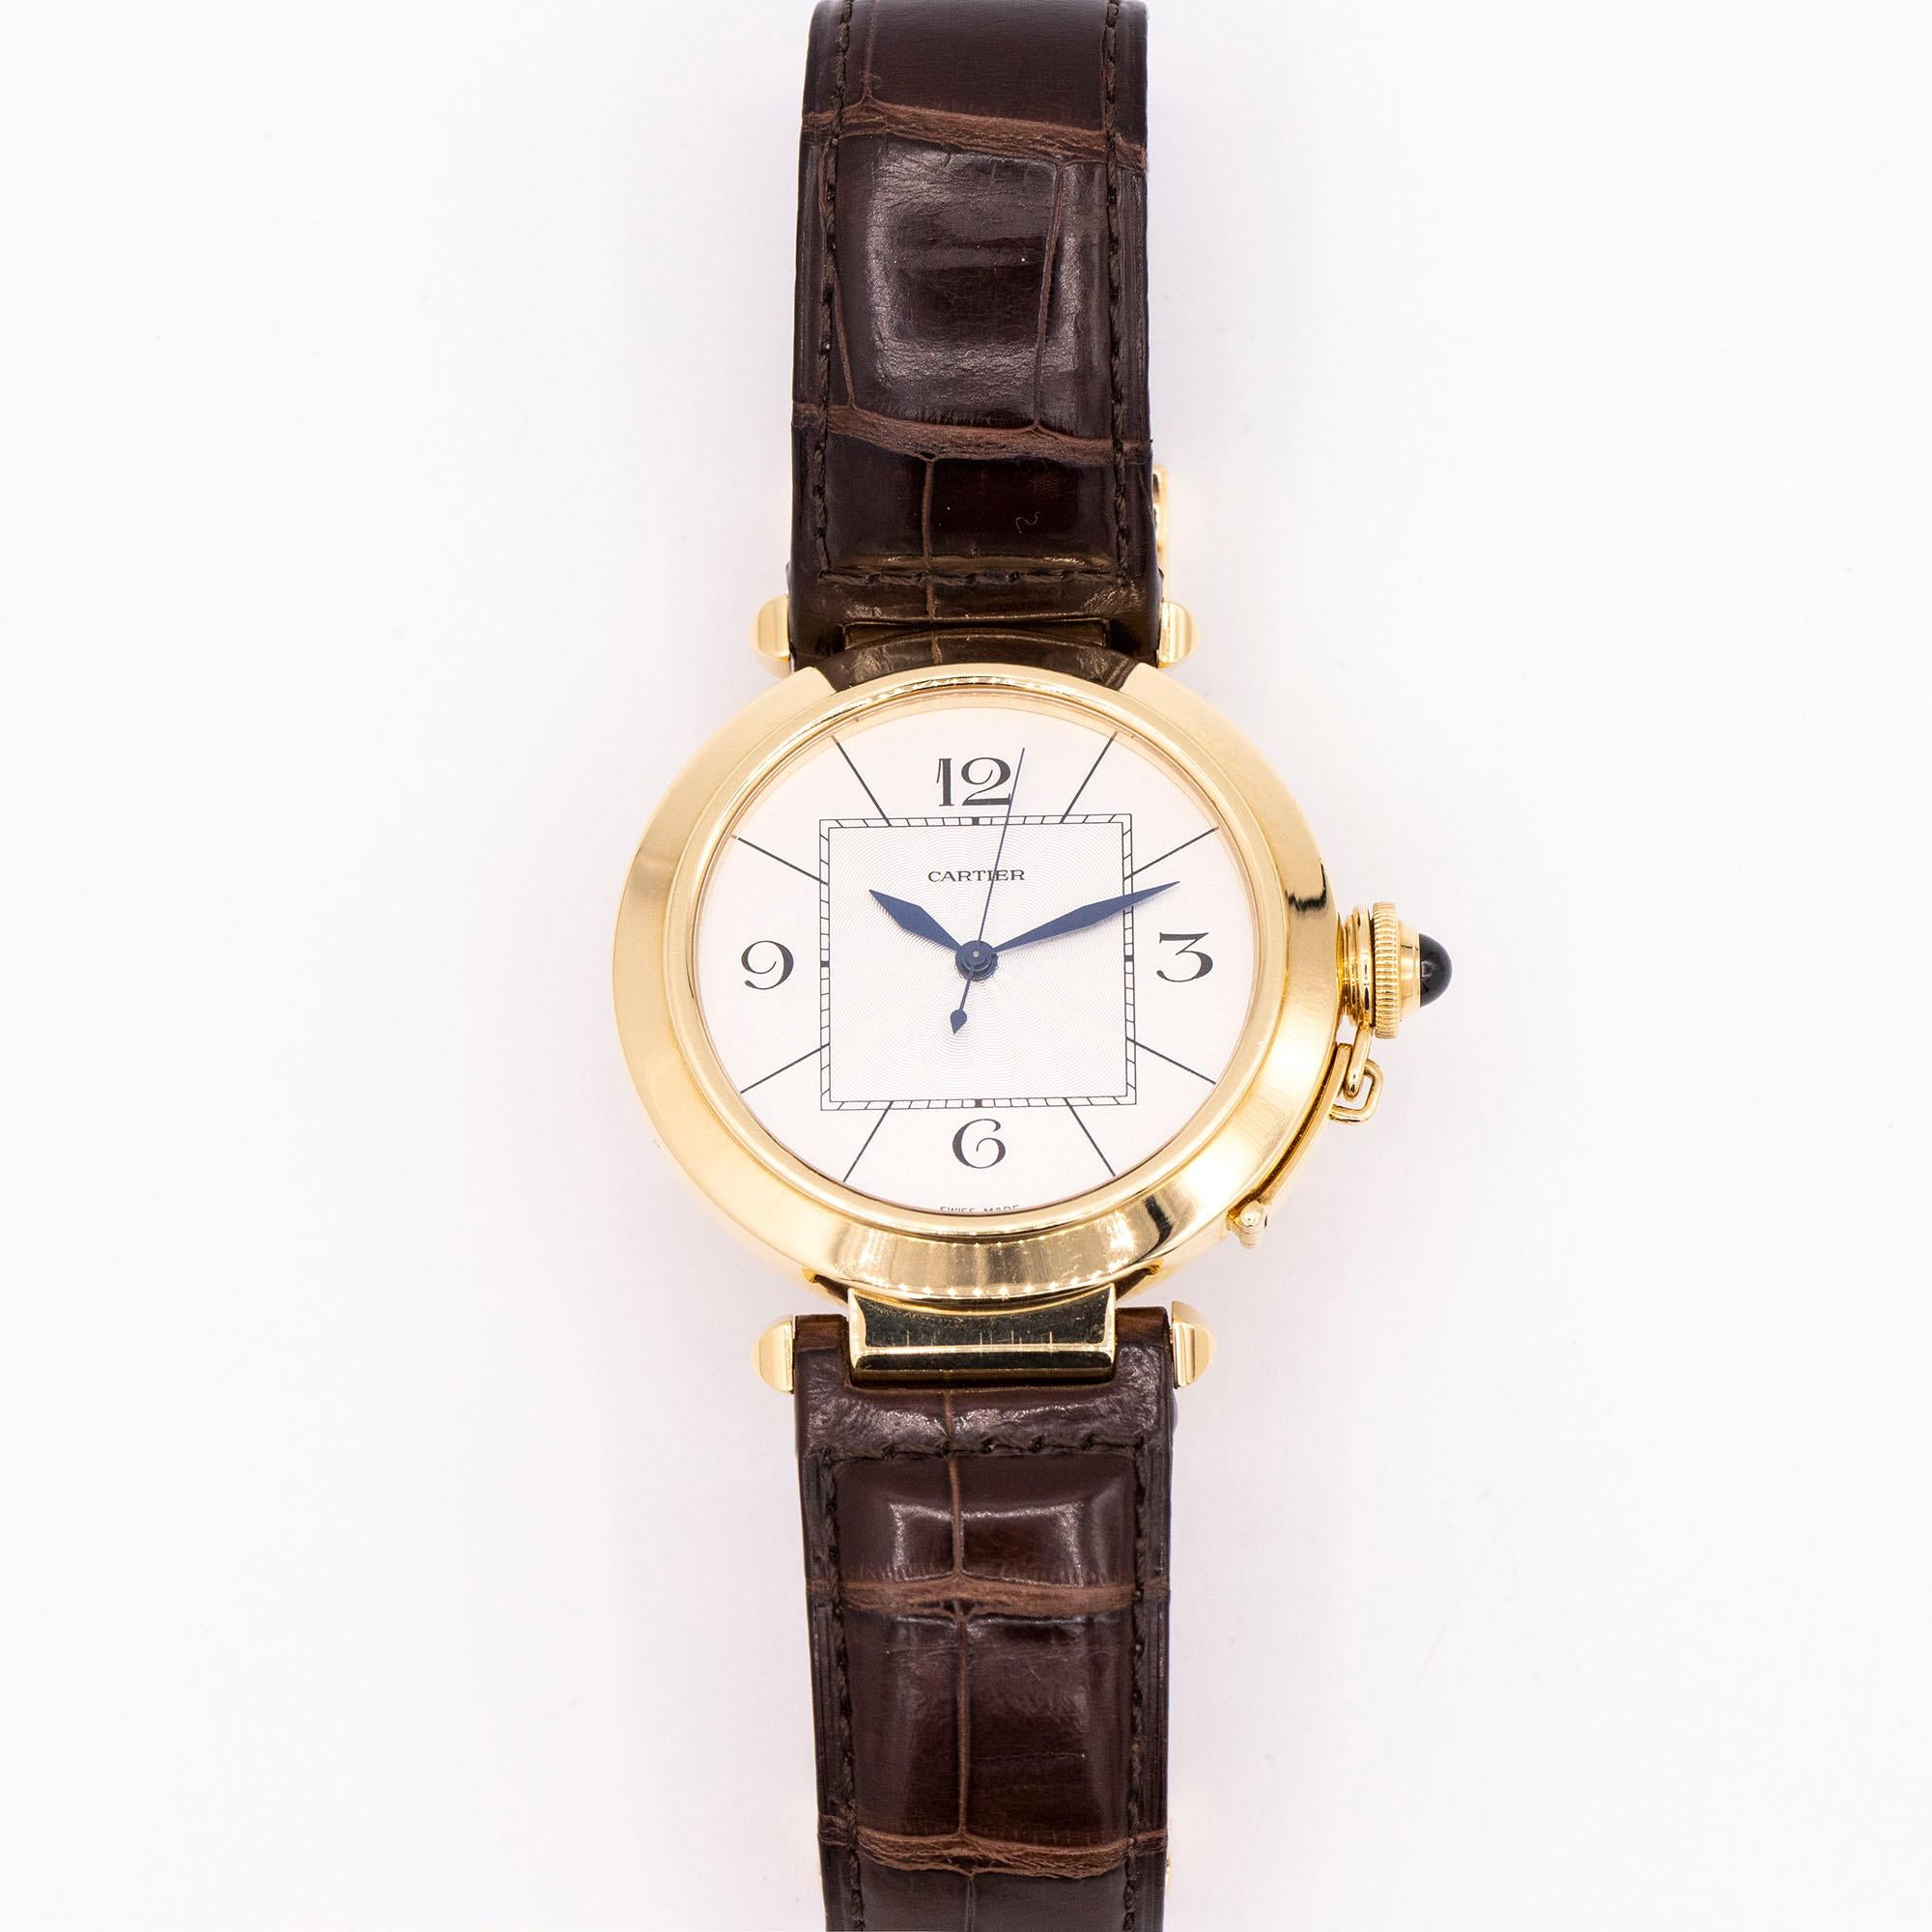 18kt Yellow Gold Cartier Pasha W3019551. Beautiful dress watch at 42mm in size adorned by a stunning silver dial. The hands are blue'd steel to add elegance. This timepiece is fully automatic and is set on a brown leather strap. This pasha is made